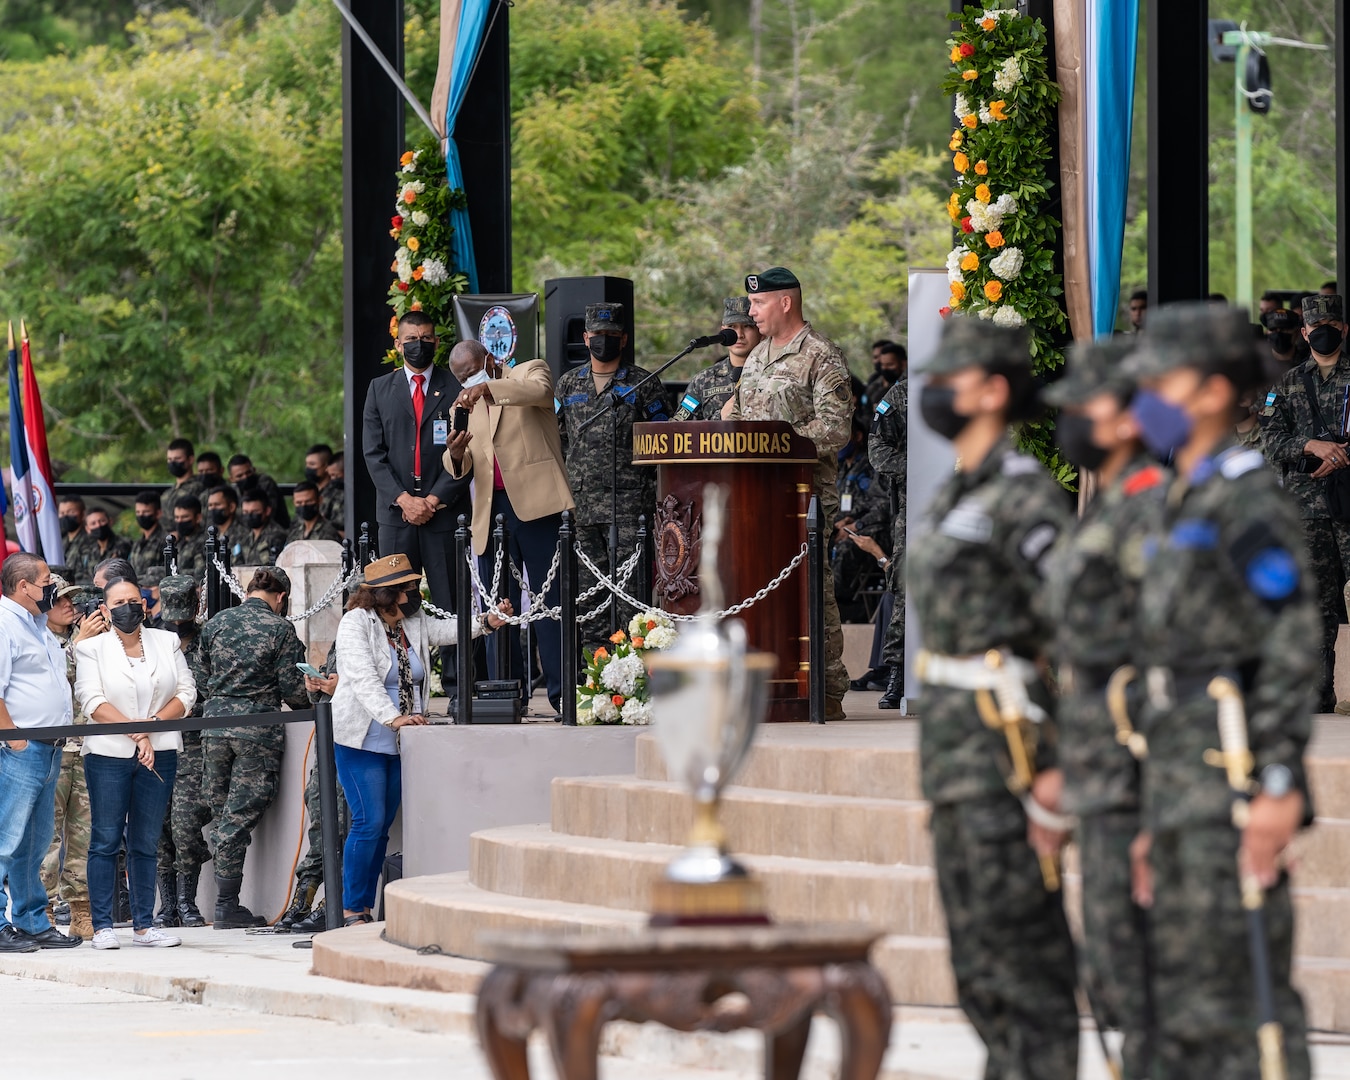 Col. Jay Brooke, Special Operations Command South Deputy commander, speaks during the opening ceremony of Fuerzas Comando 2022 on June 13, 2022, in Tegucigalpa, Honduras.